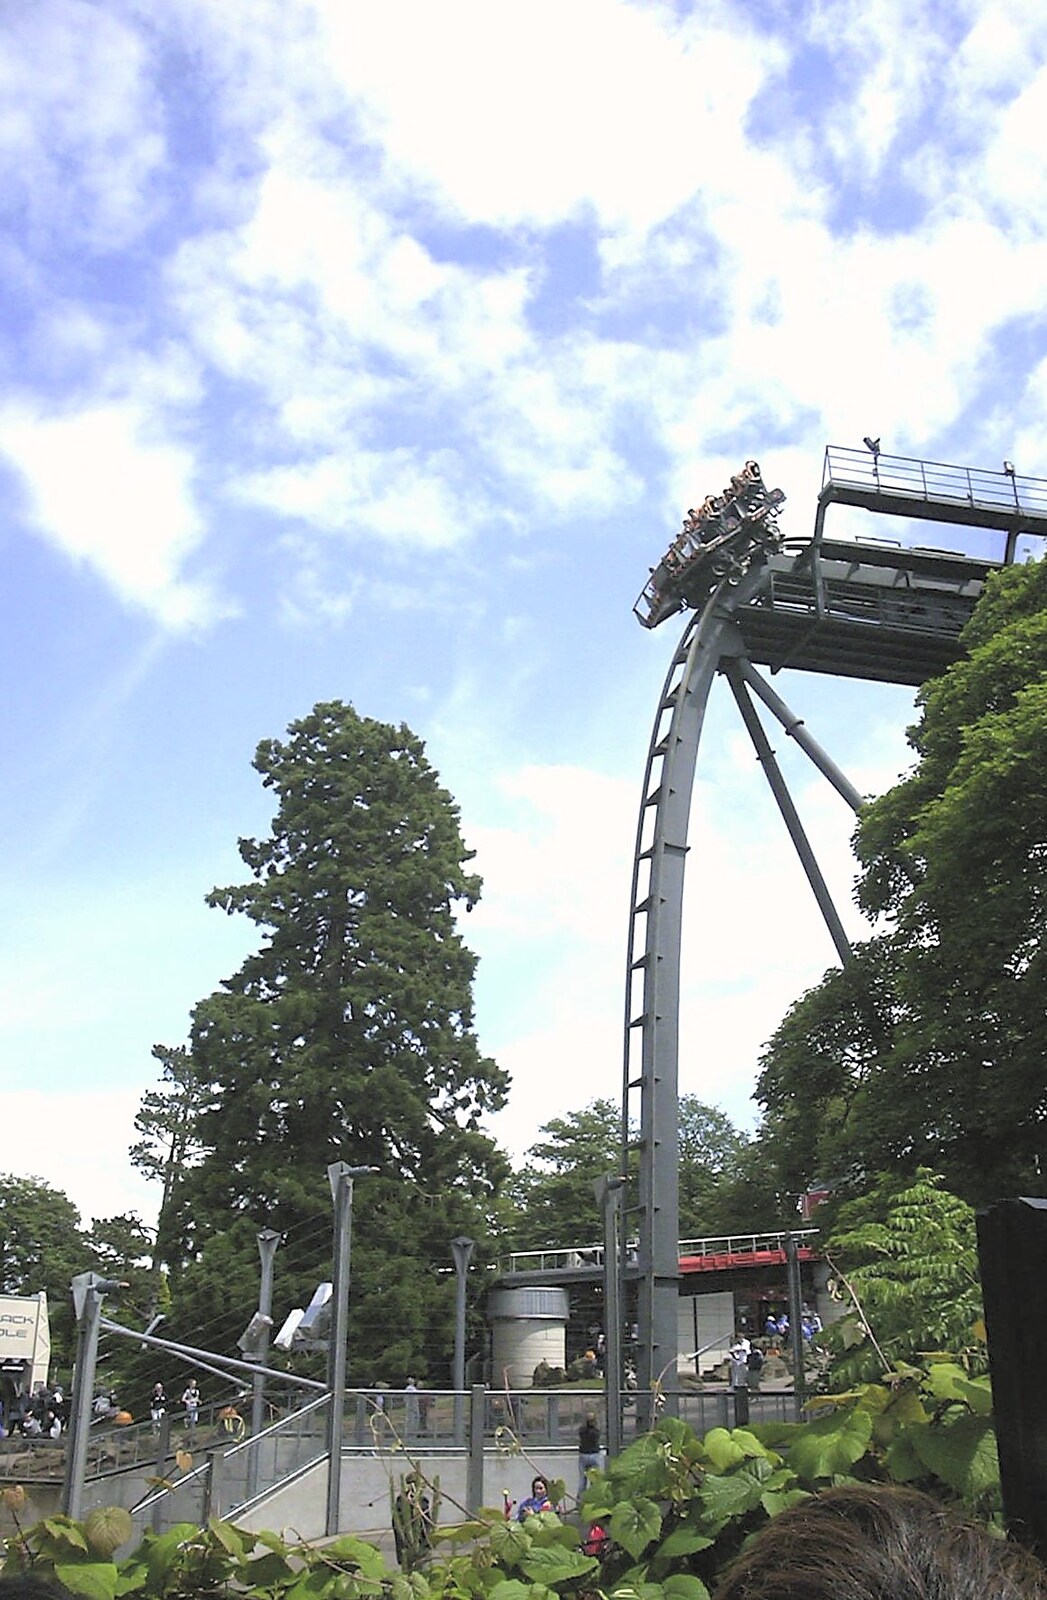 Oblivion is ready to drop from A Trip to Alton Towers, Staffordshire - 19th June 2004